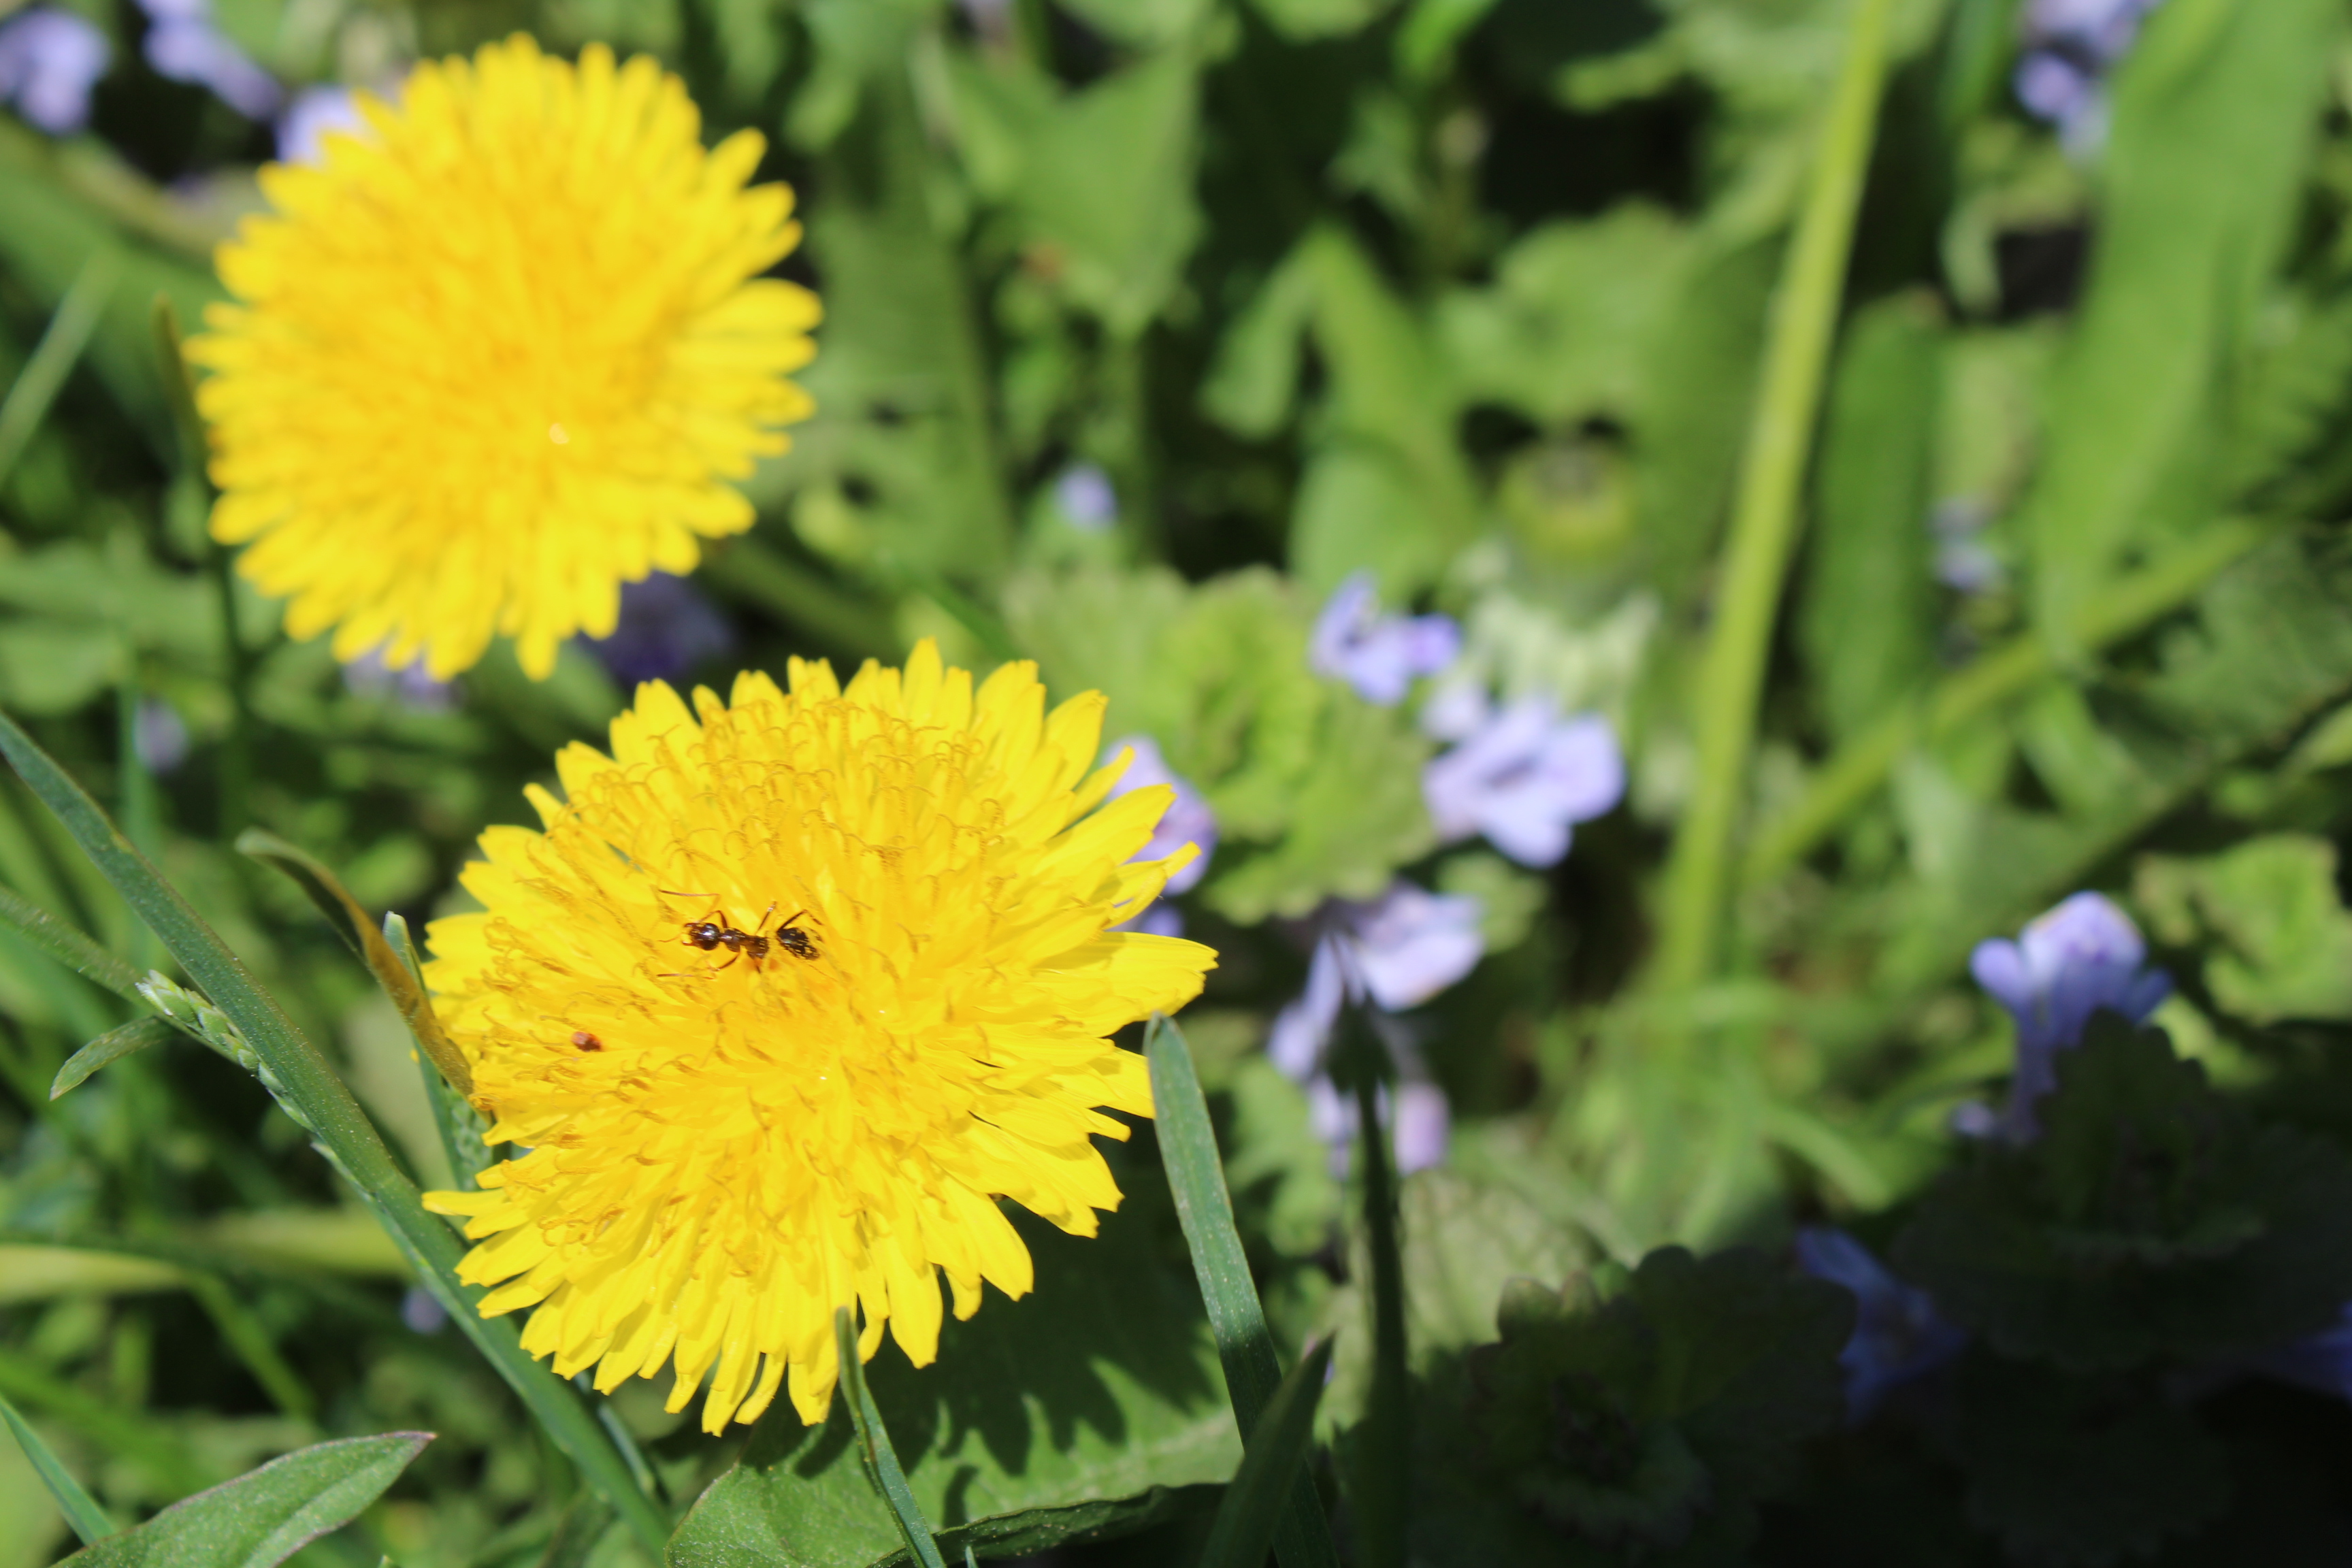 An ant walks in the center of a bright yellow flower head.